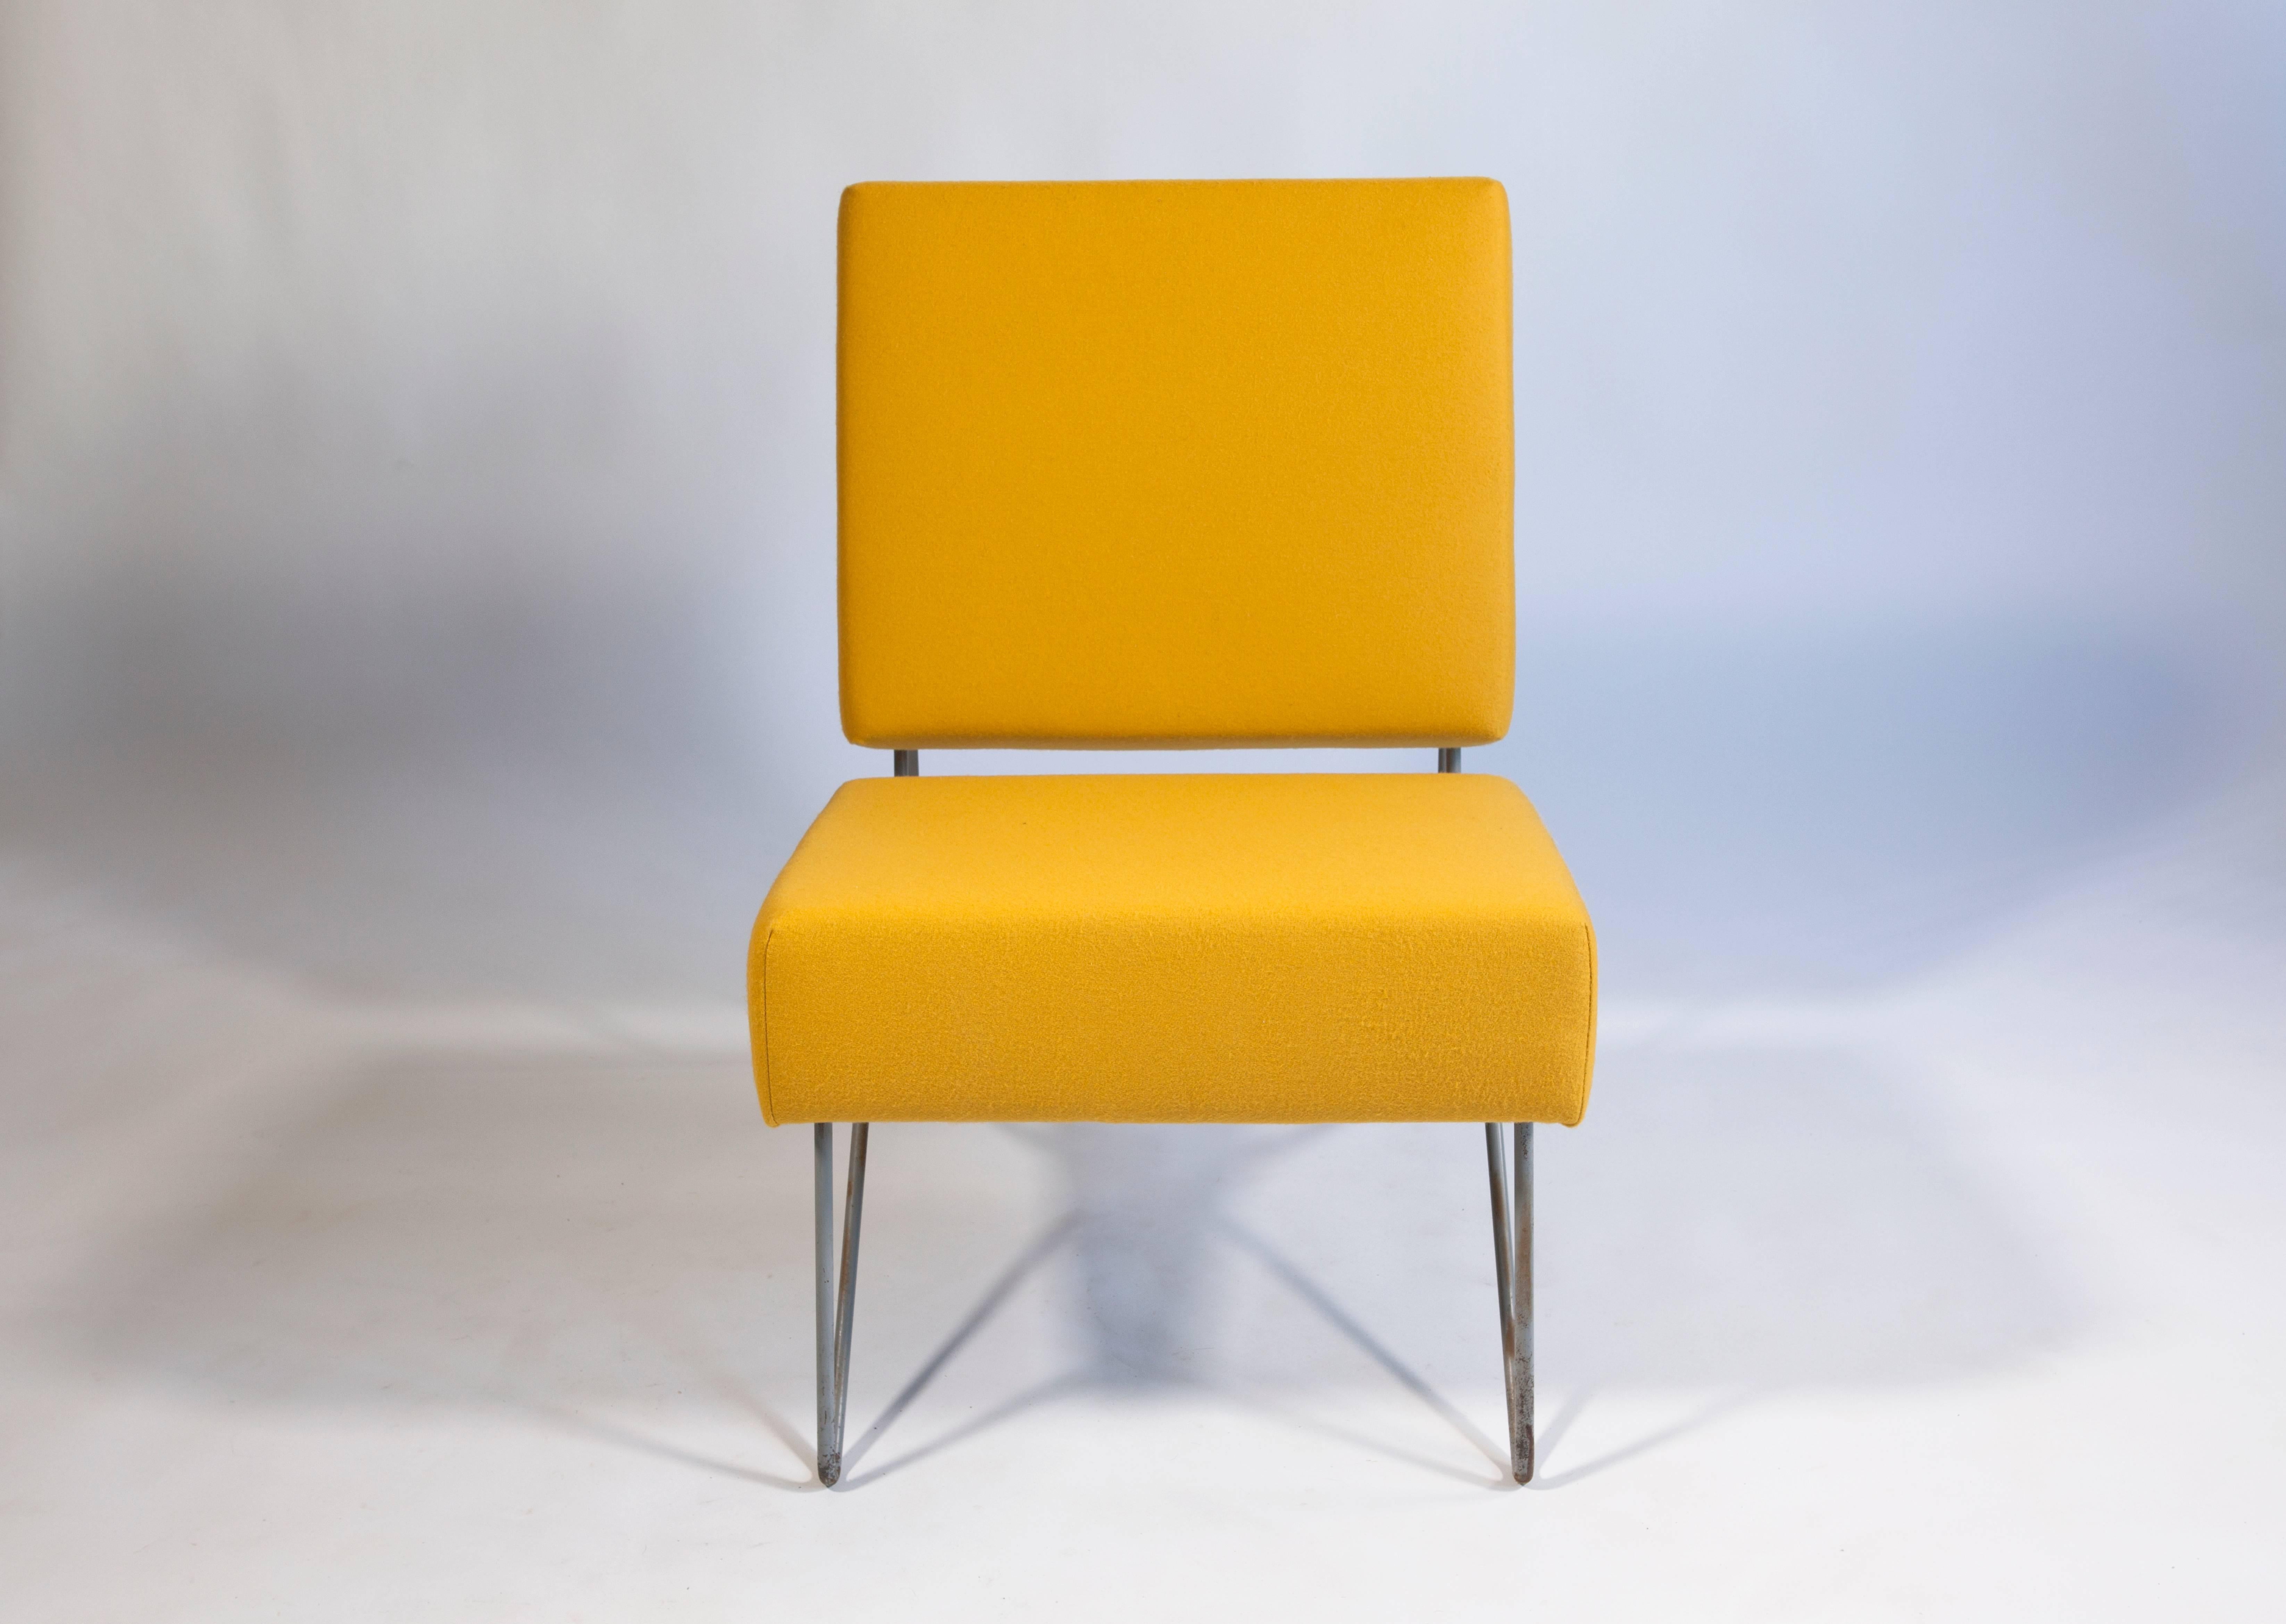 Beautiful Combex chair designed by Cees Braakman for Pastoe in 1954. The number of the model is FM03. The chair has been completely reupholstered with a gorgeous yellow fabric. 

The Dutch designer Cees Braakman (1917-1995) has been very important